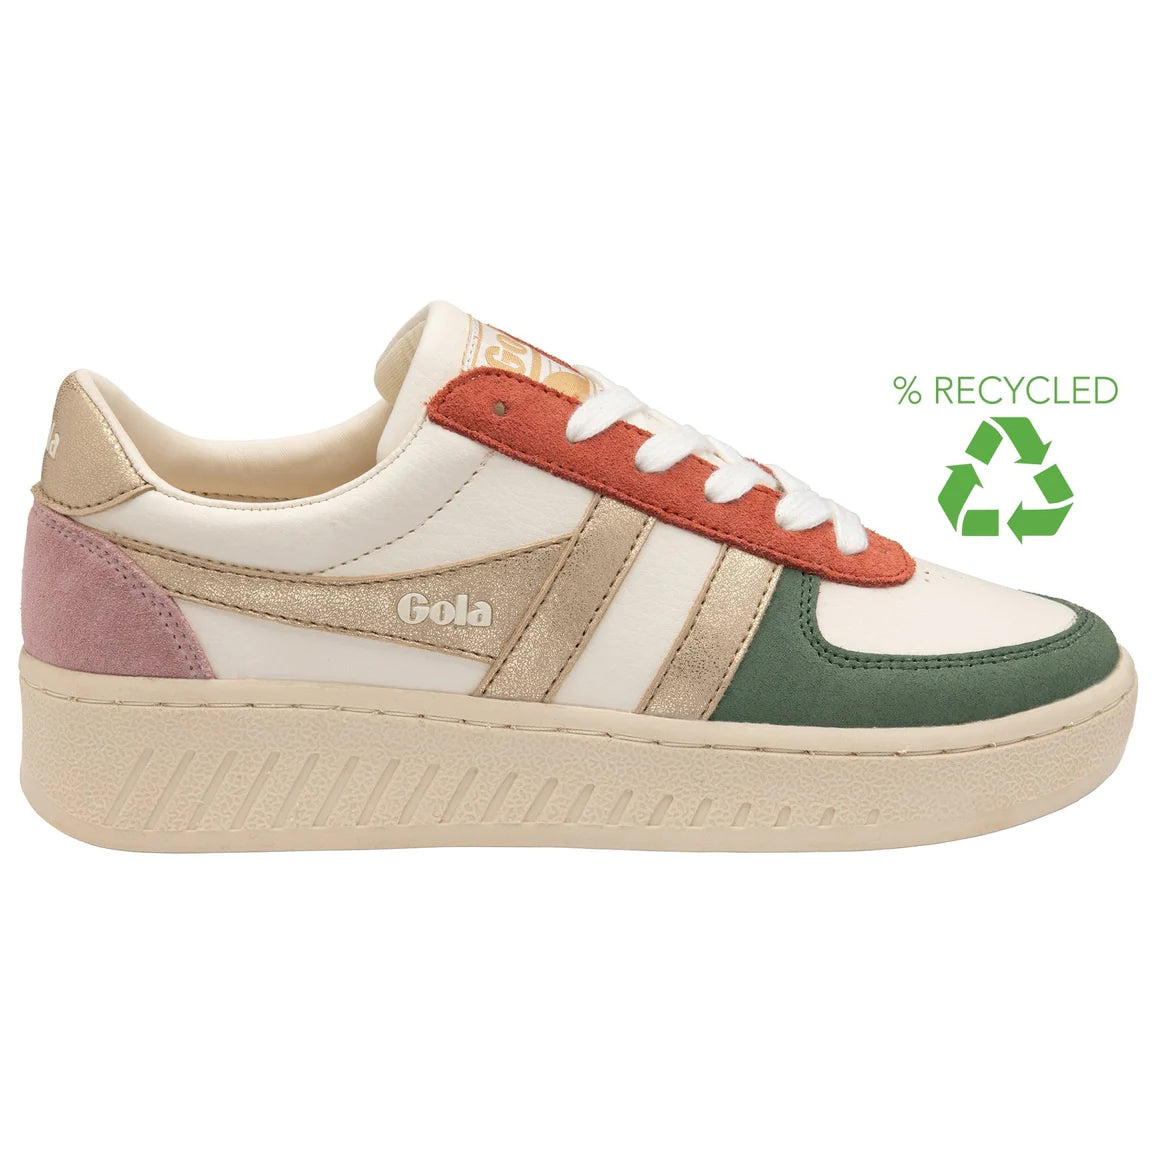 Grandslam Quadrant Sneakers in Off White/Sage/Gold/Pastel Pink